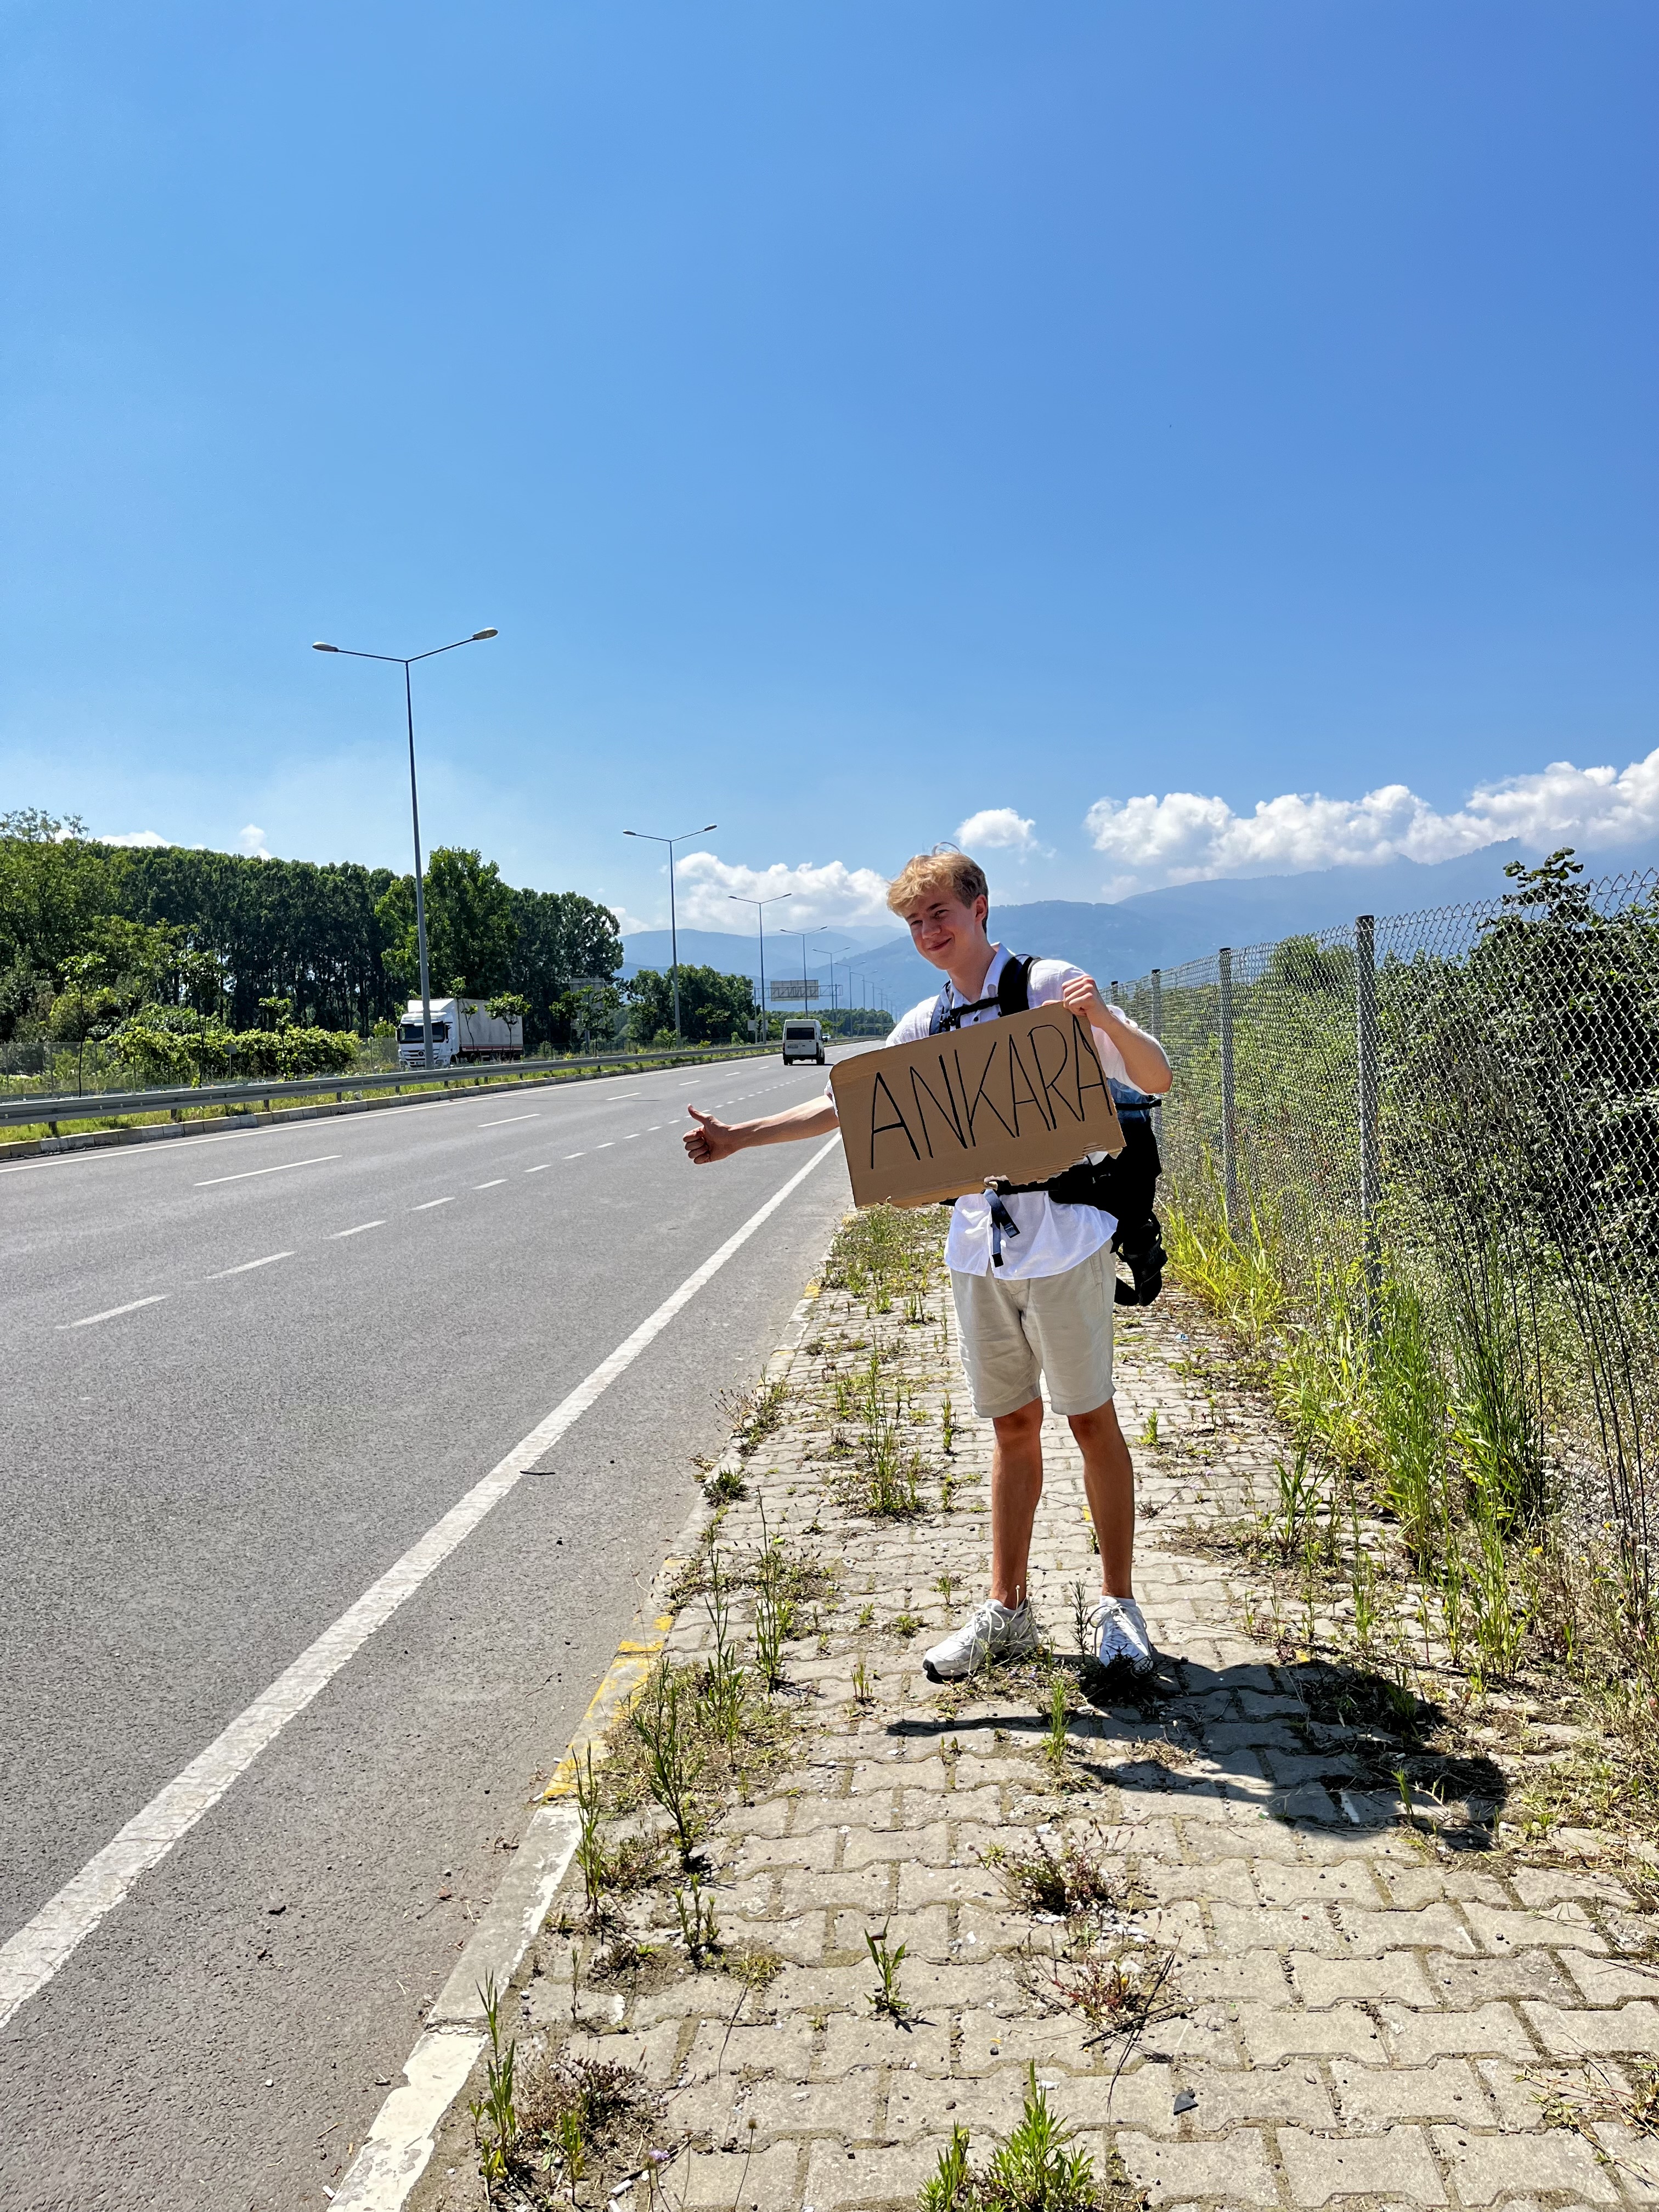 Hitchhiking to our first stop - Ankara